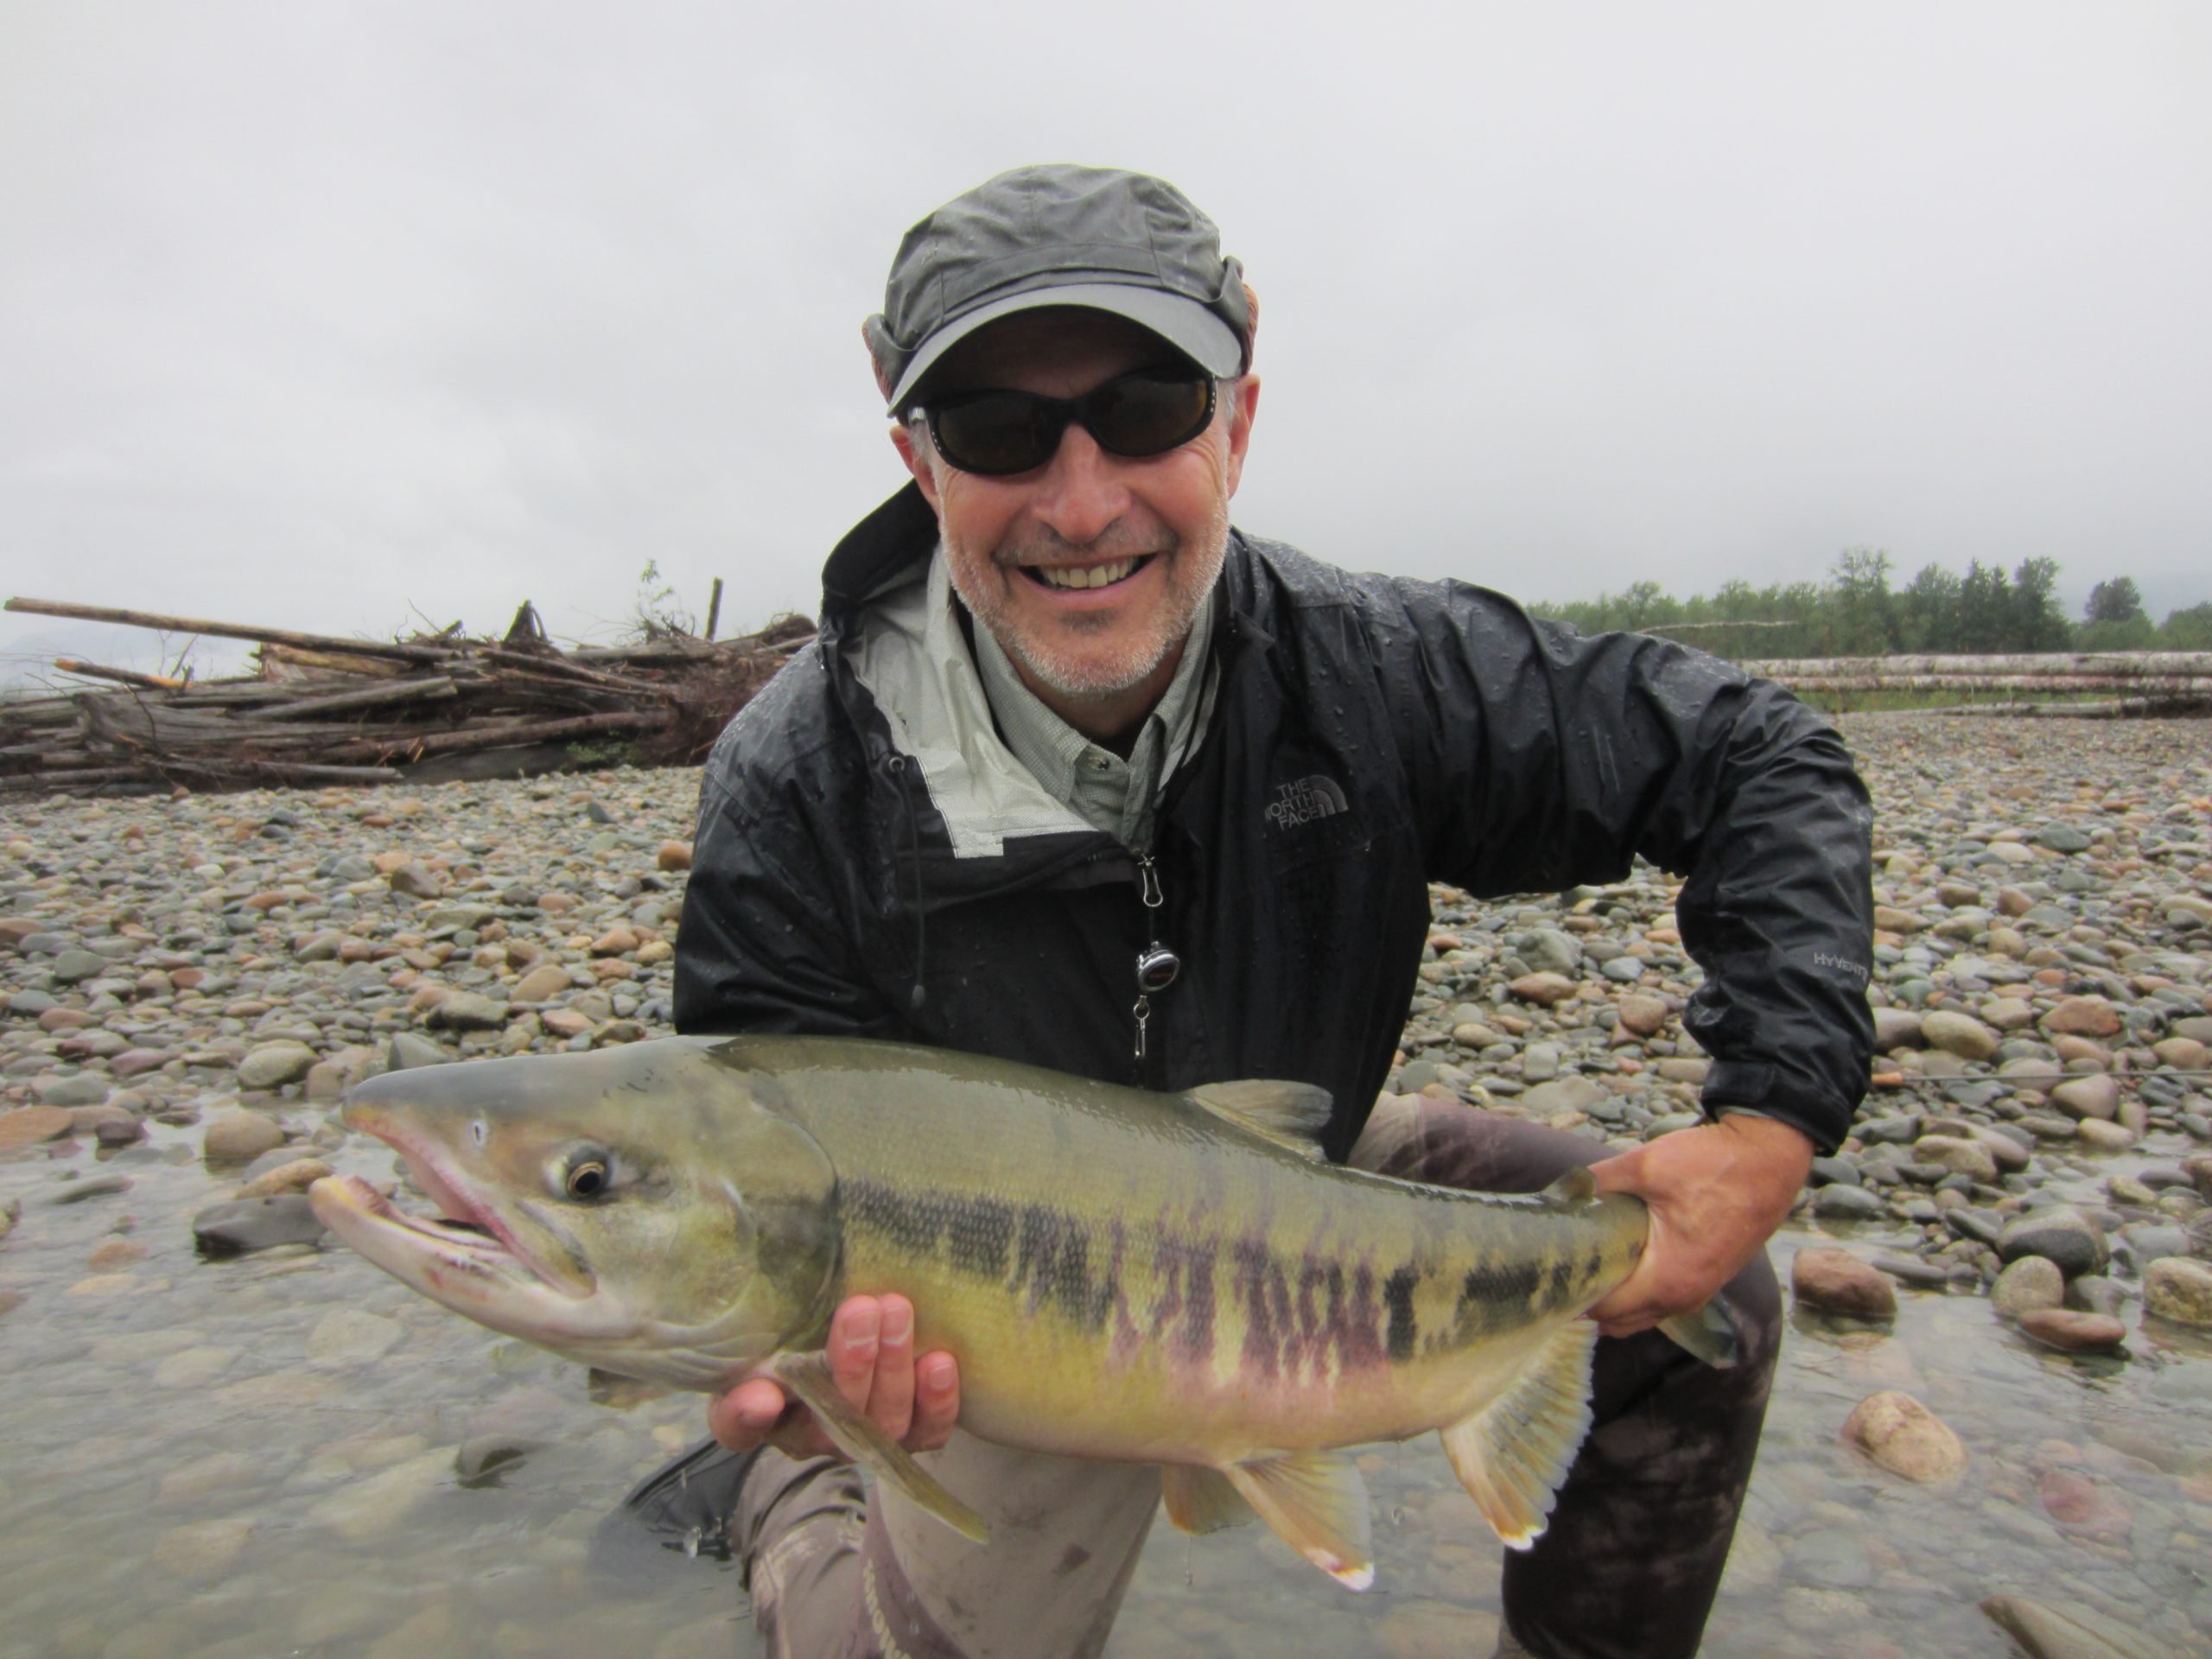 John looking very happy with another big Chum Salmon.